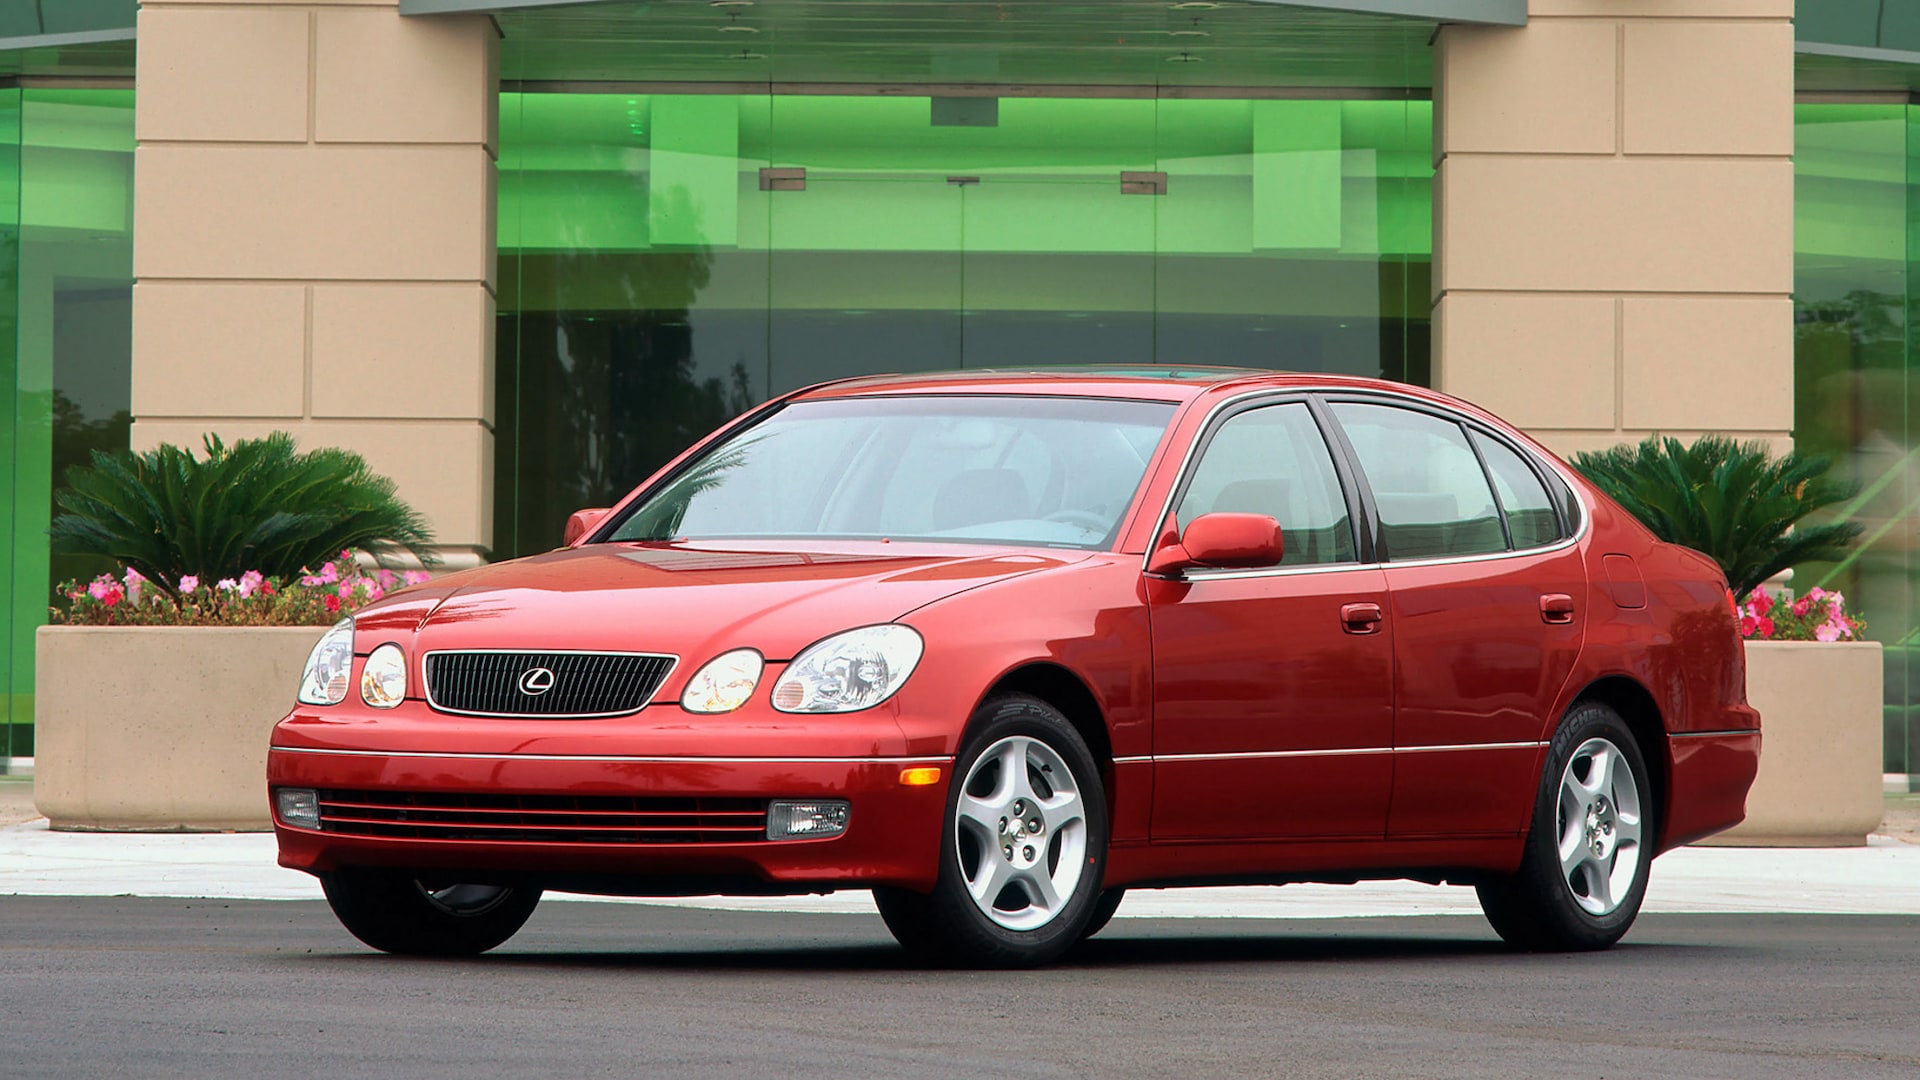 Lexus GS: Fun Facts, History, Photos, Generations, and Specifications